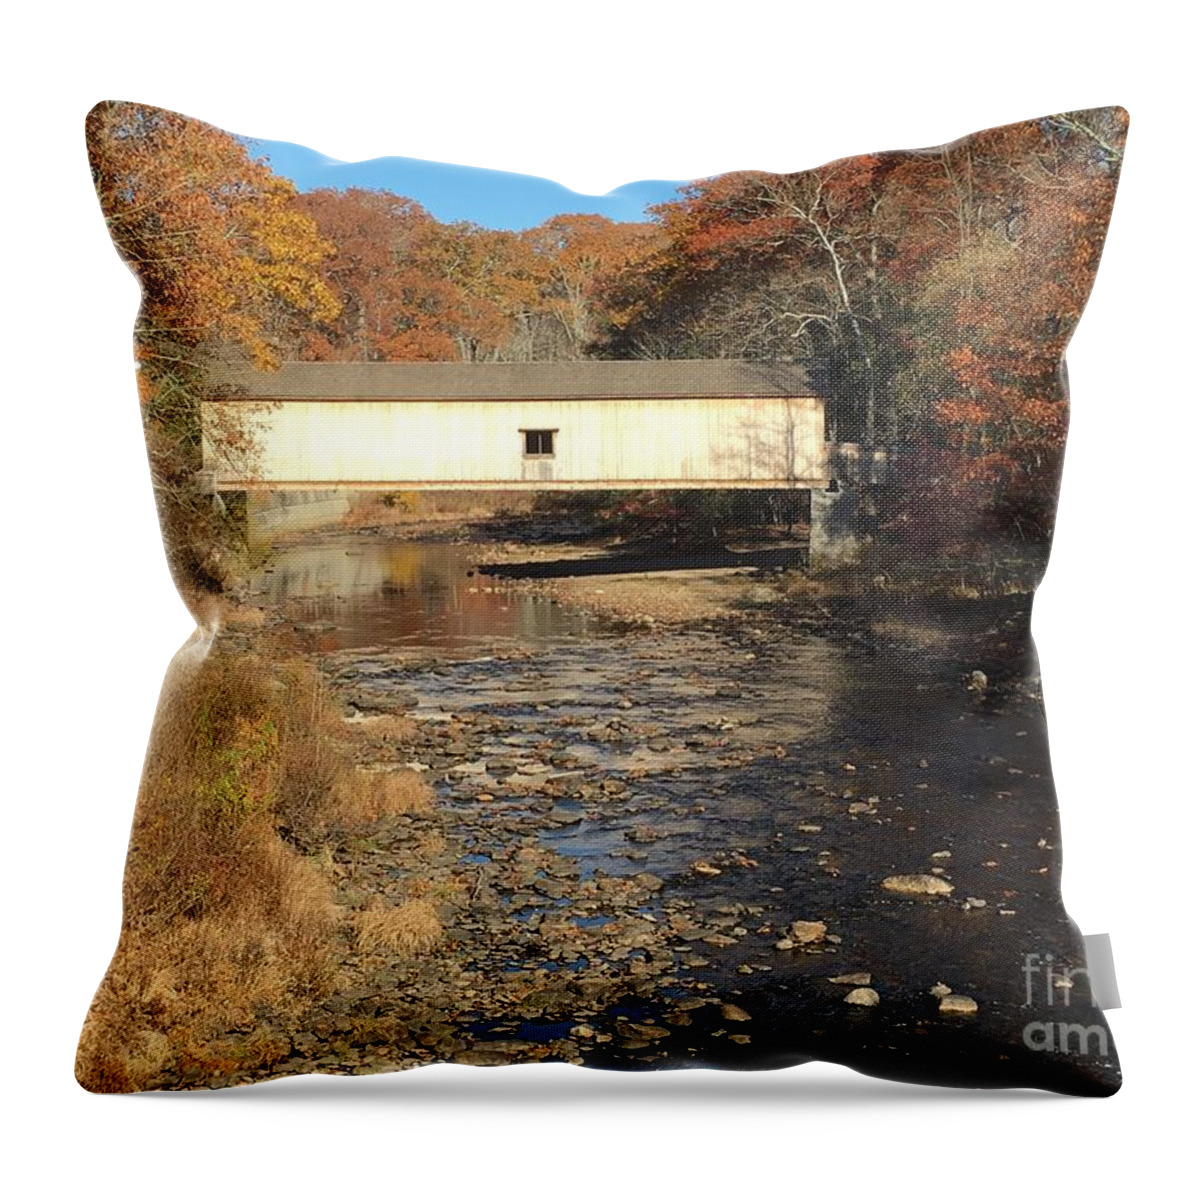 Covered Bridge Throw Pillow featuring the photograph Covered Bridge by B Rossitto